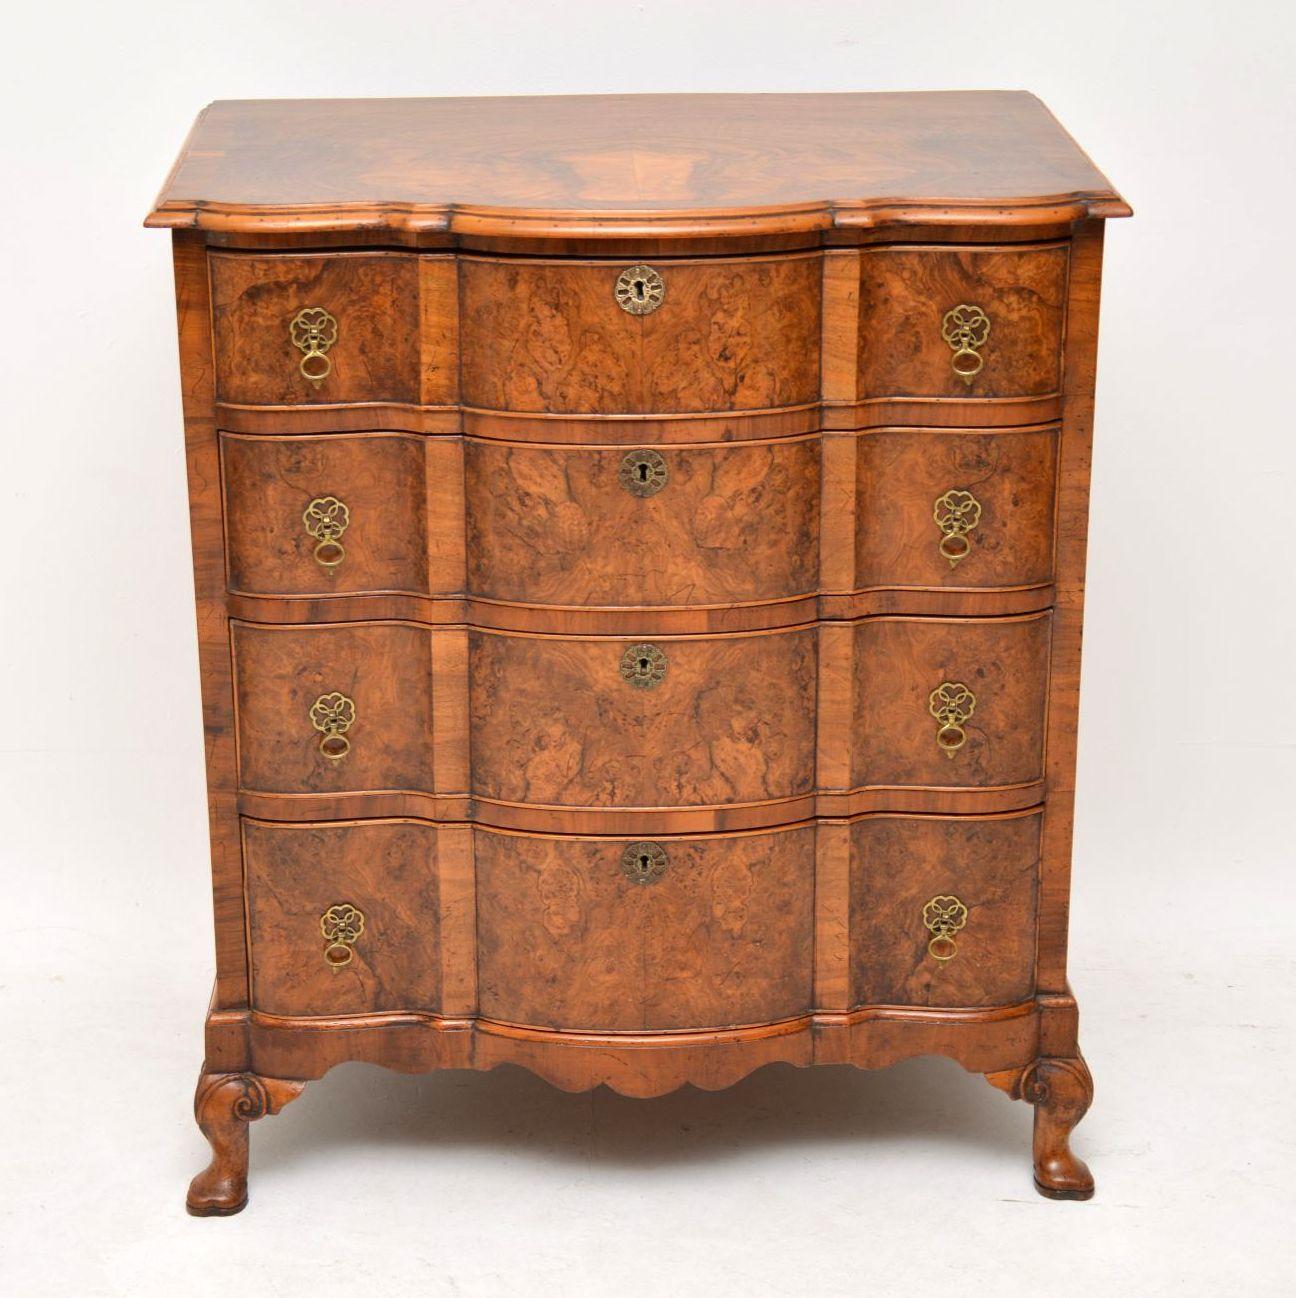 This antique walnut chest of drawers is of extremely high quality and has a well shaped front. The pattern of the burr walnut on the top is stunning and it’s cross banded outside. The four burr walnut drawers are all graduated in depth and also have